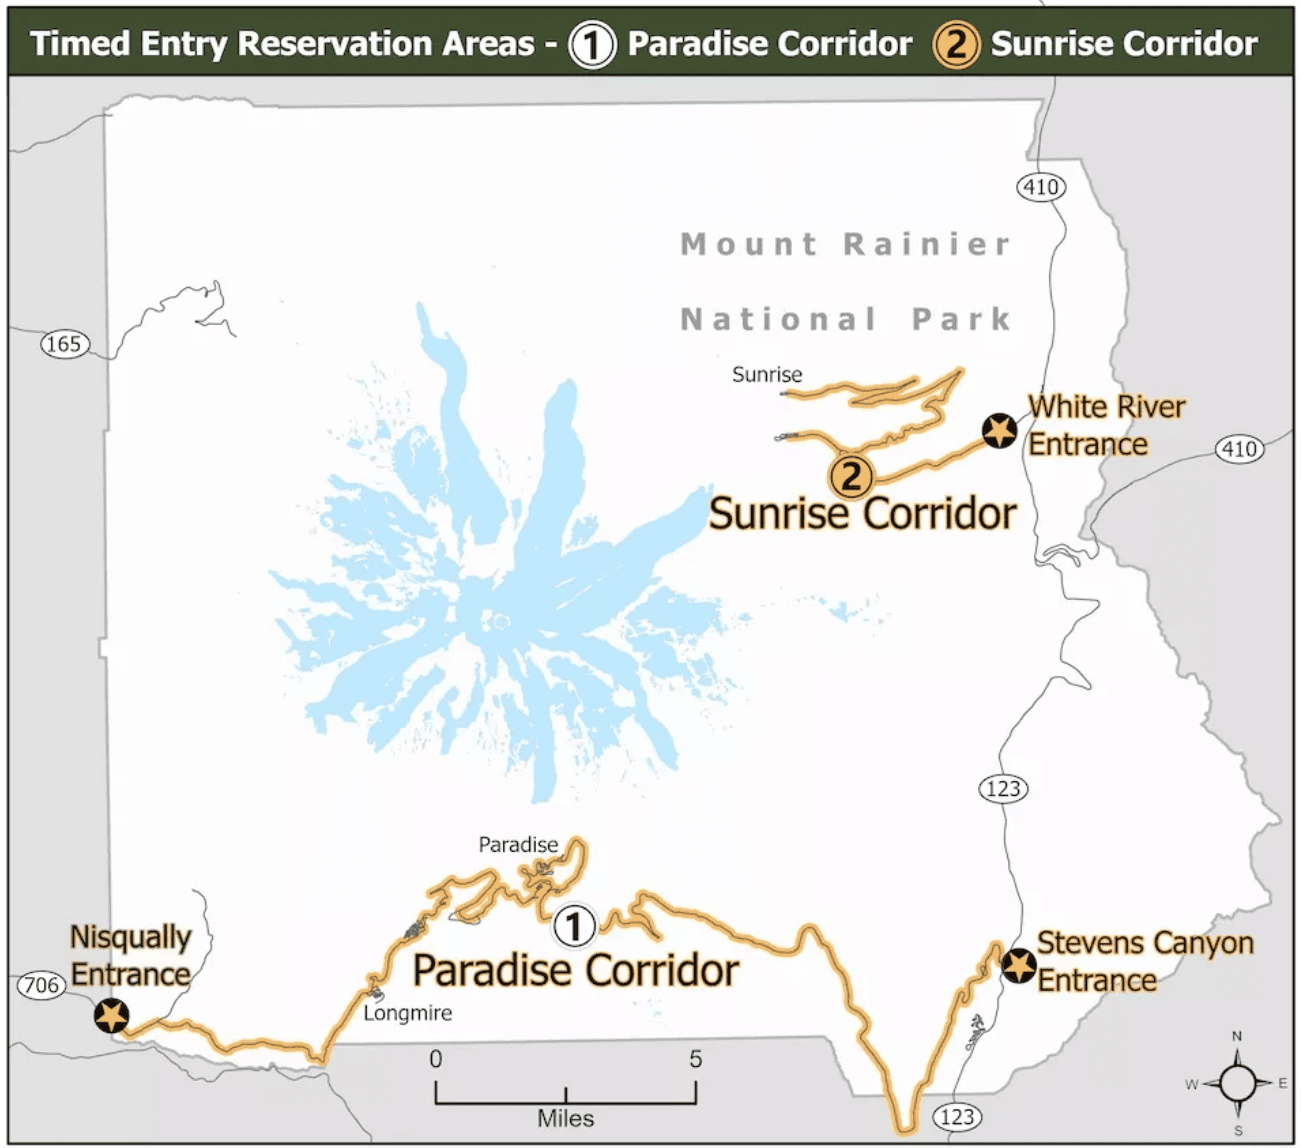 Mount Rainier National Park Timed Entry Reservation Areas - Image credit: NPS